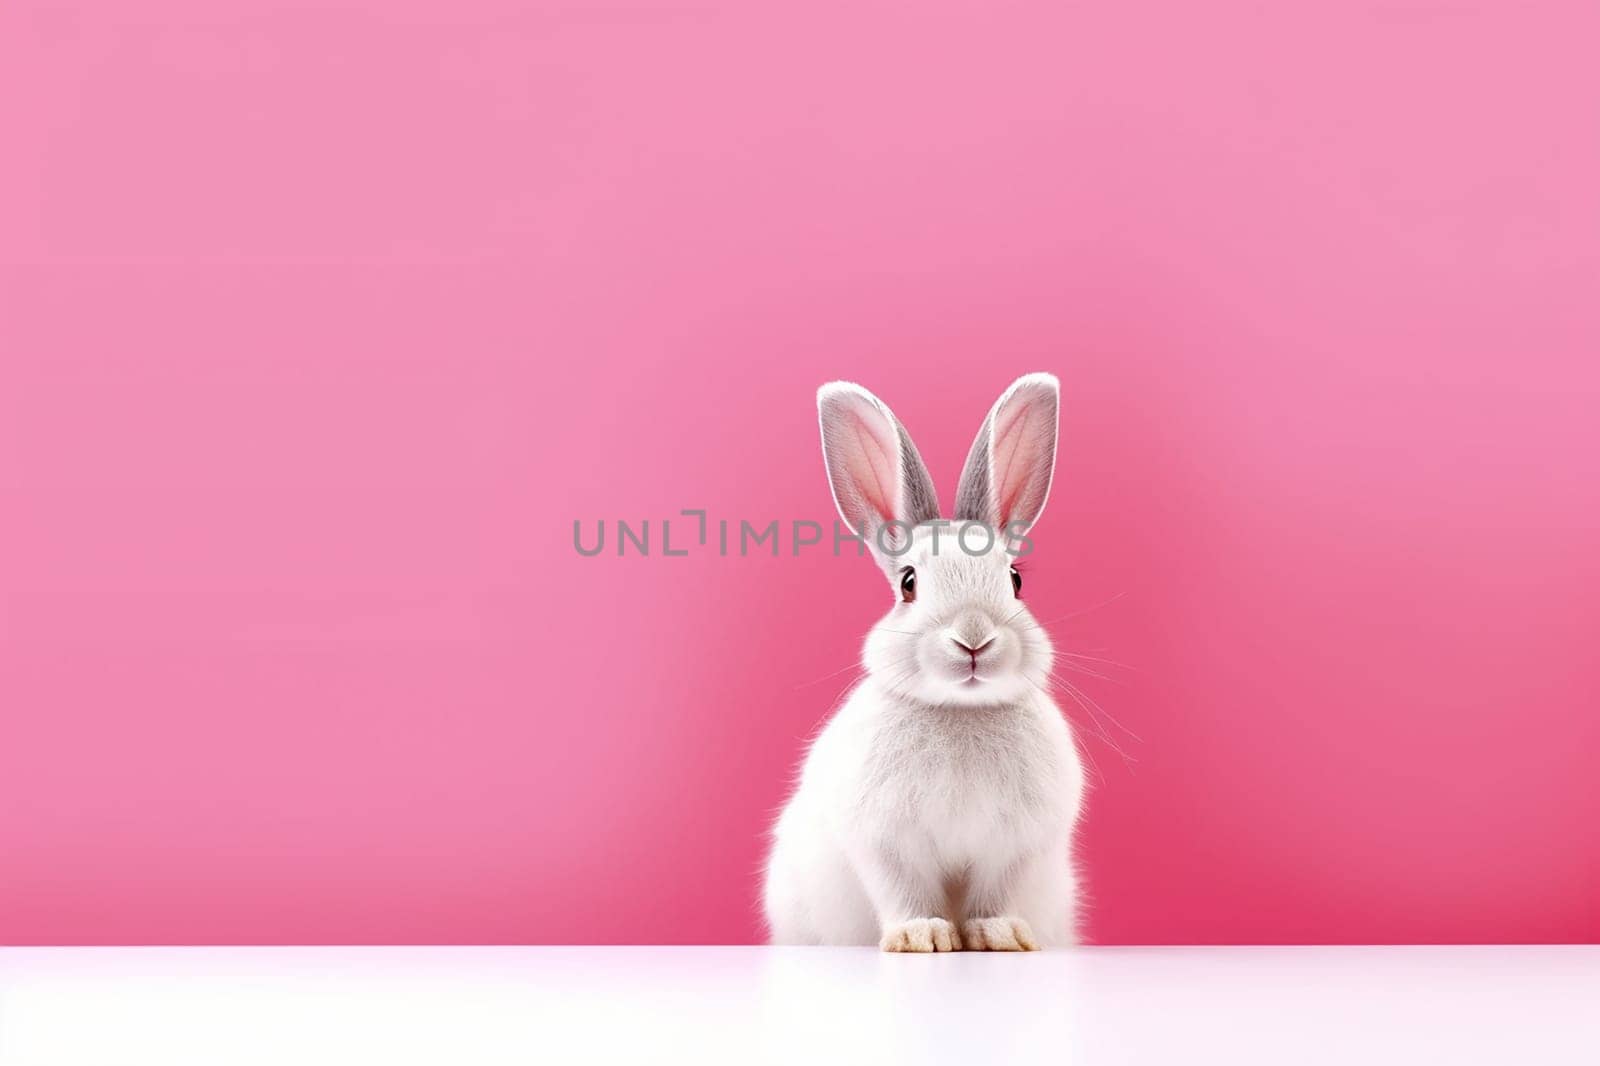 A little cute and adorable small rabbit, baby bunny photo, family pet, neutral pink background by Hype2art